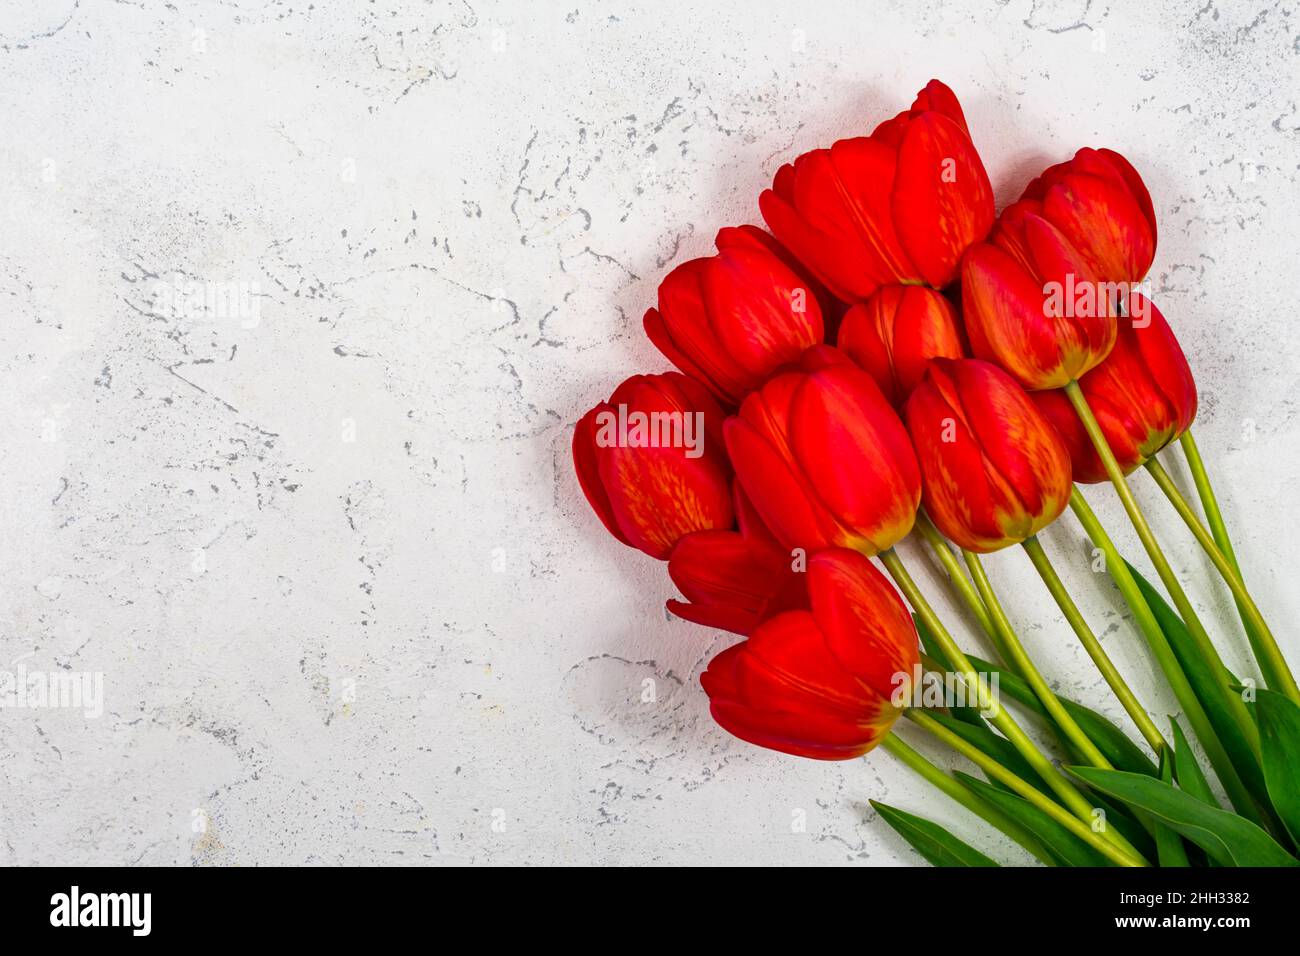 Red tulips on a white concrete background. Place for an inscription. The basis for the postcard. View from above. Stock Photo